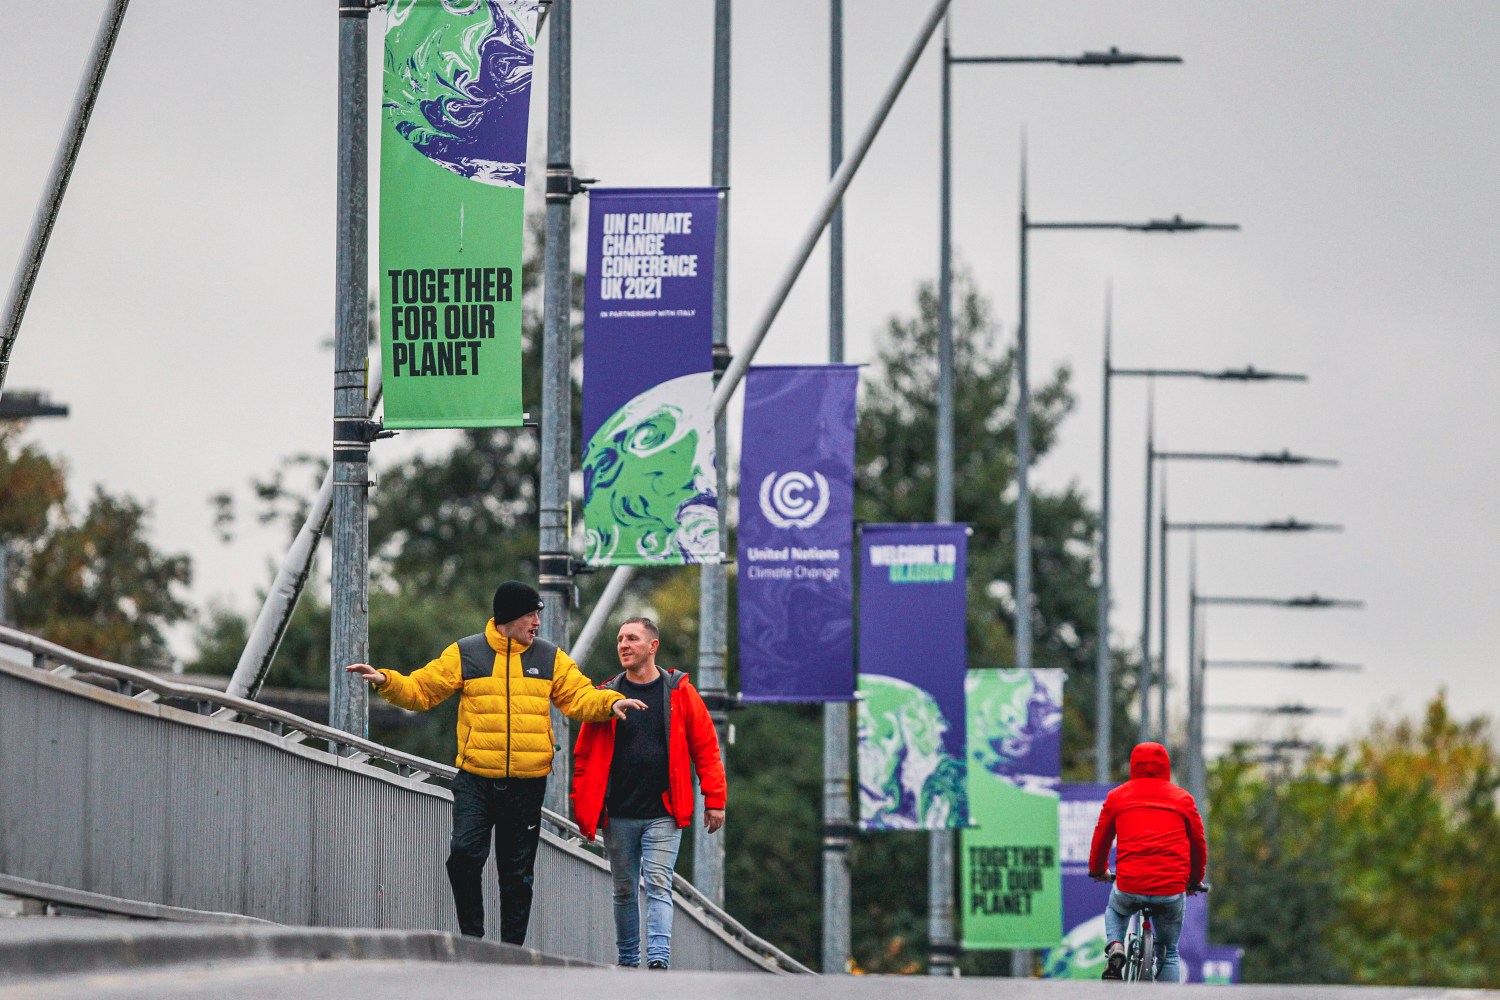 A pedestrian crosses the Clyde Arc Bridge overlooking the Scottish Event Campus on September 1, 2021 in Glasgow, Scotland. The Scottish Event Campus IS one of the host venues for the upcoming COP 26 climate summit which is due to be held in Glasgow from the 1-12th November.  (Photo by Ewan Bootman/NurPhoto)NO USE FRANCE